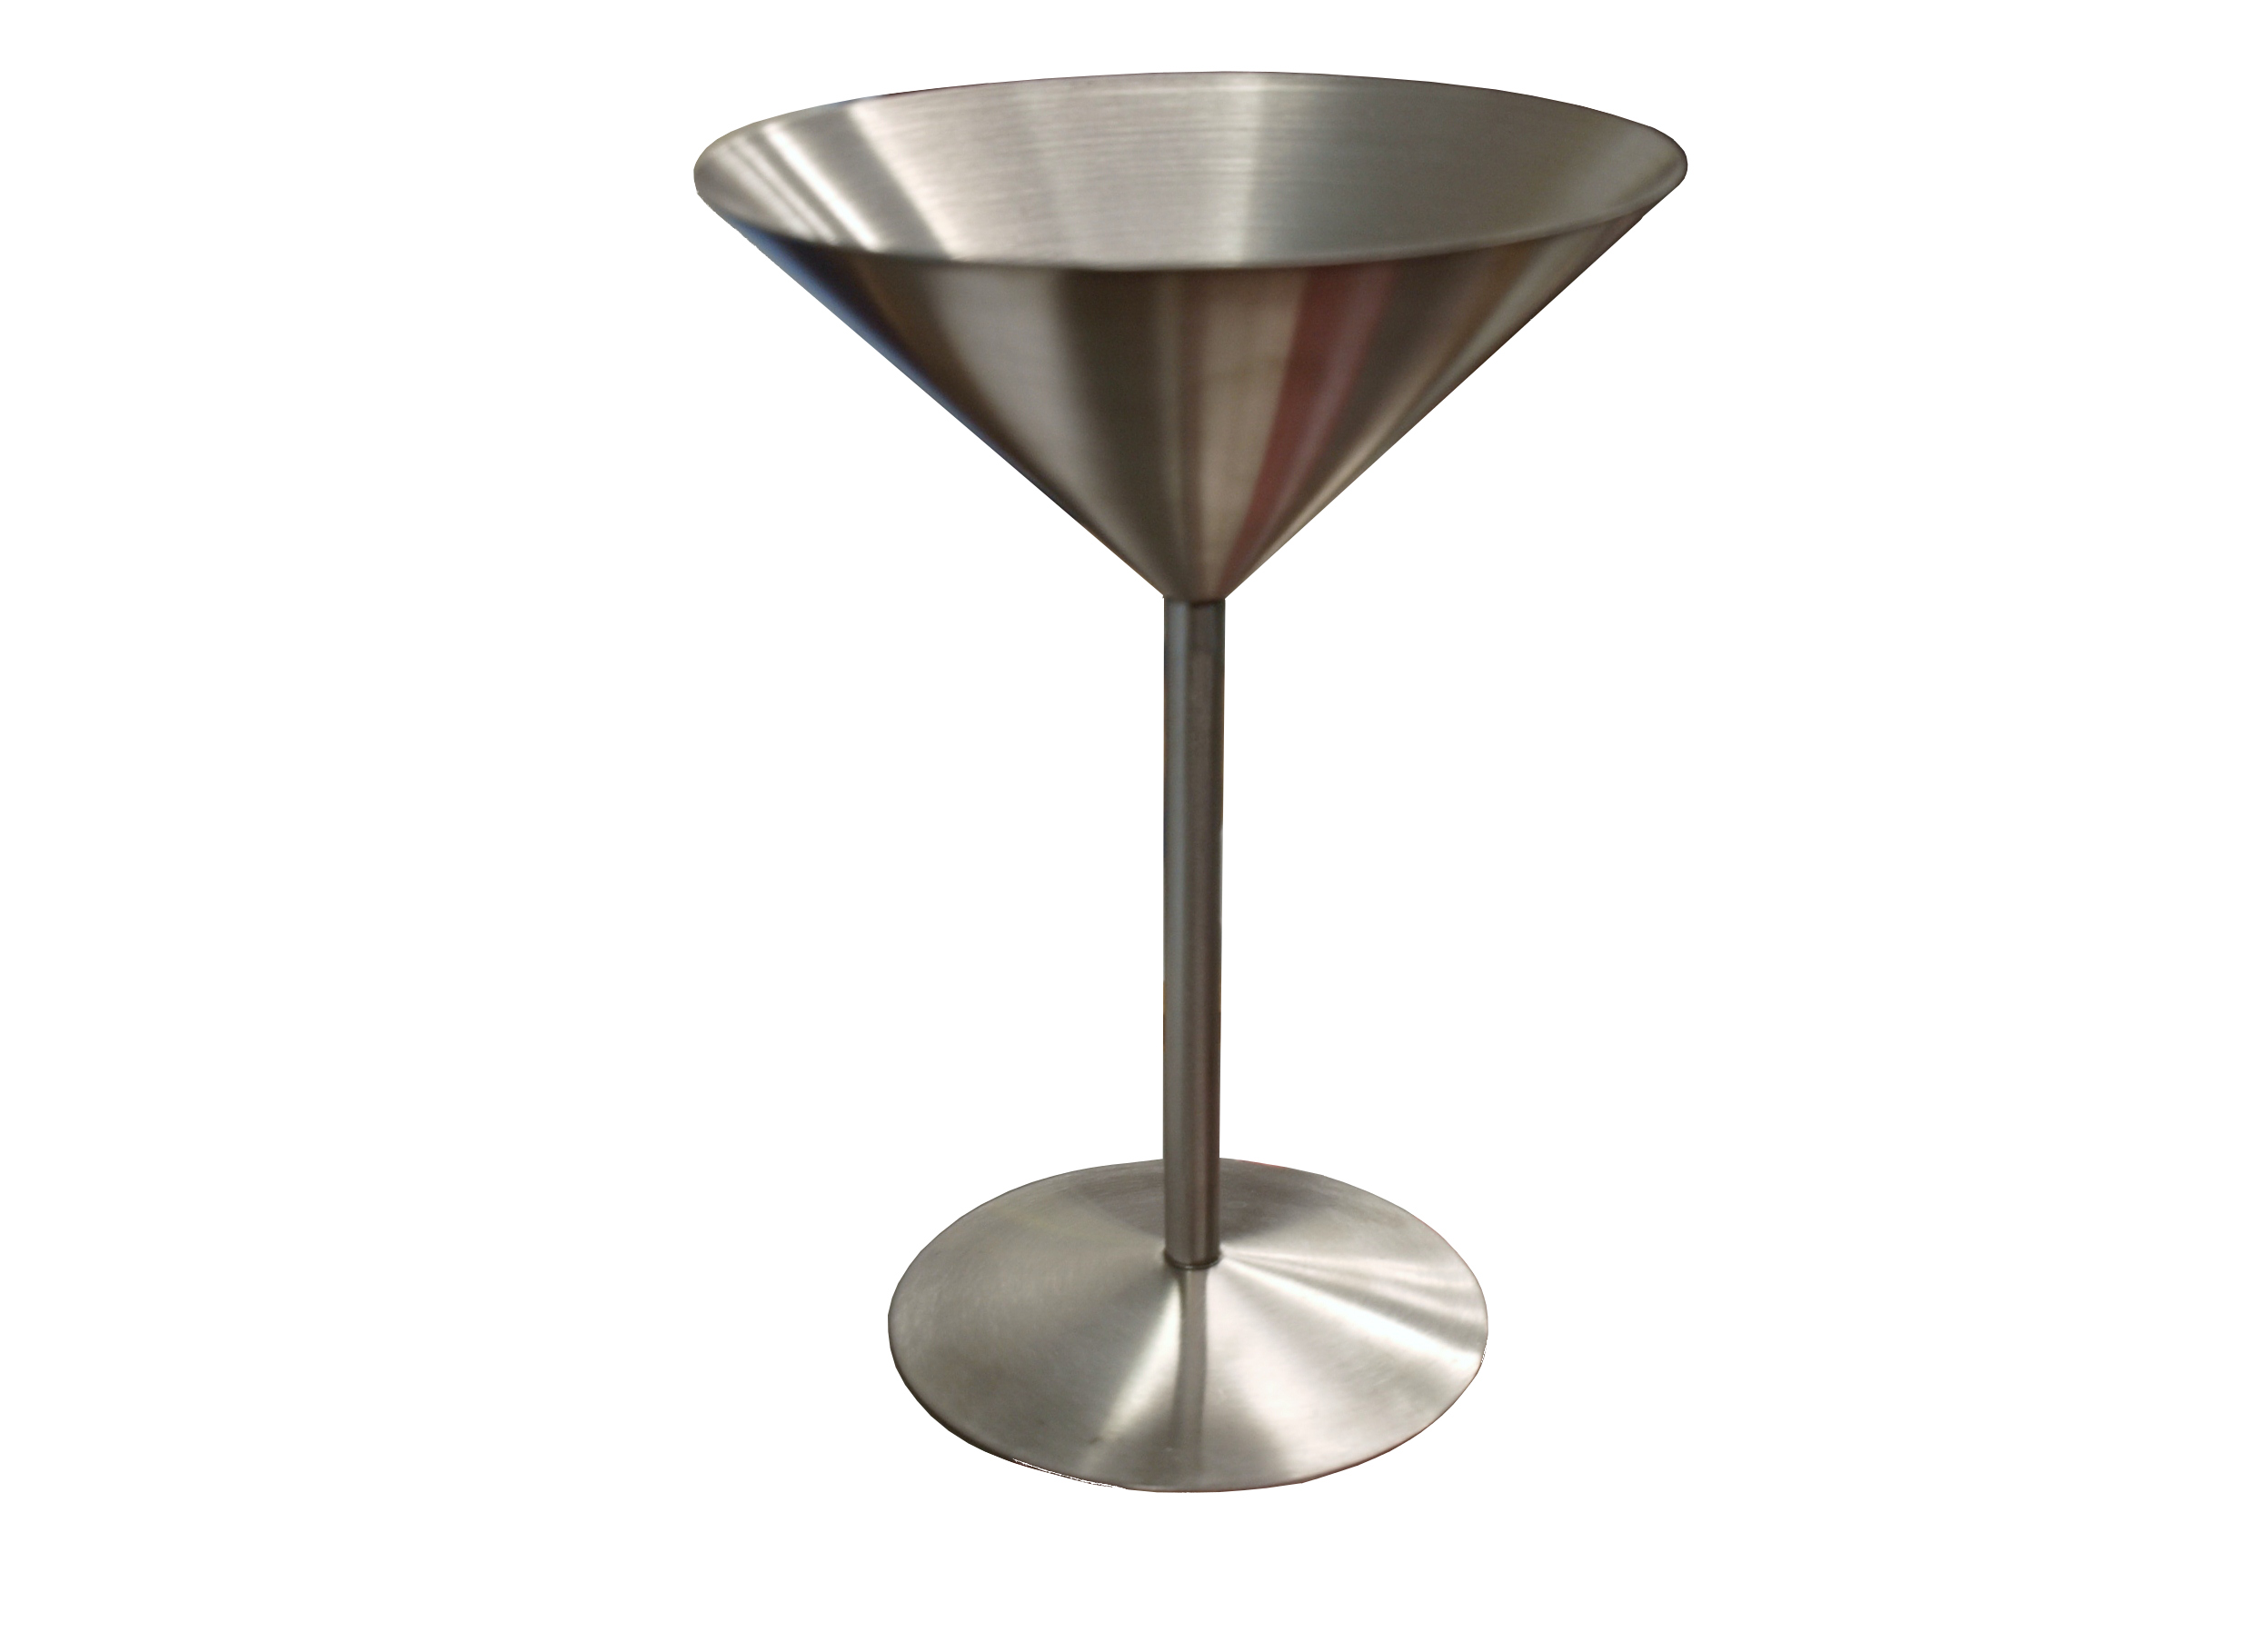 Stainless steel Martini glass